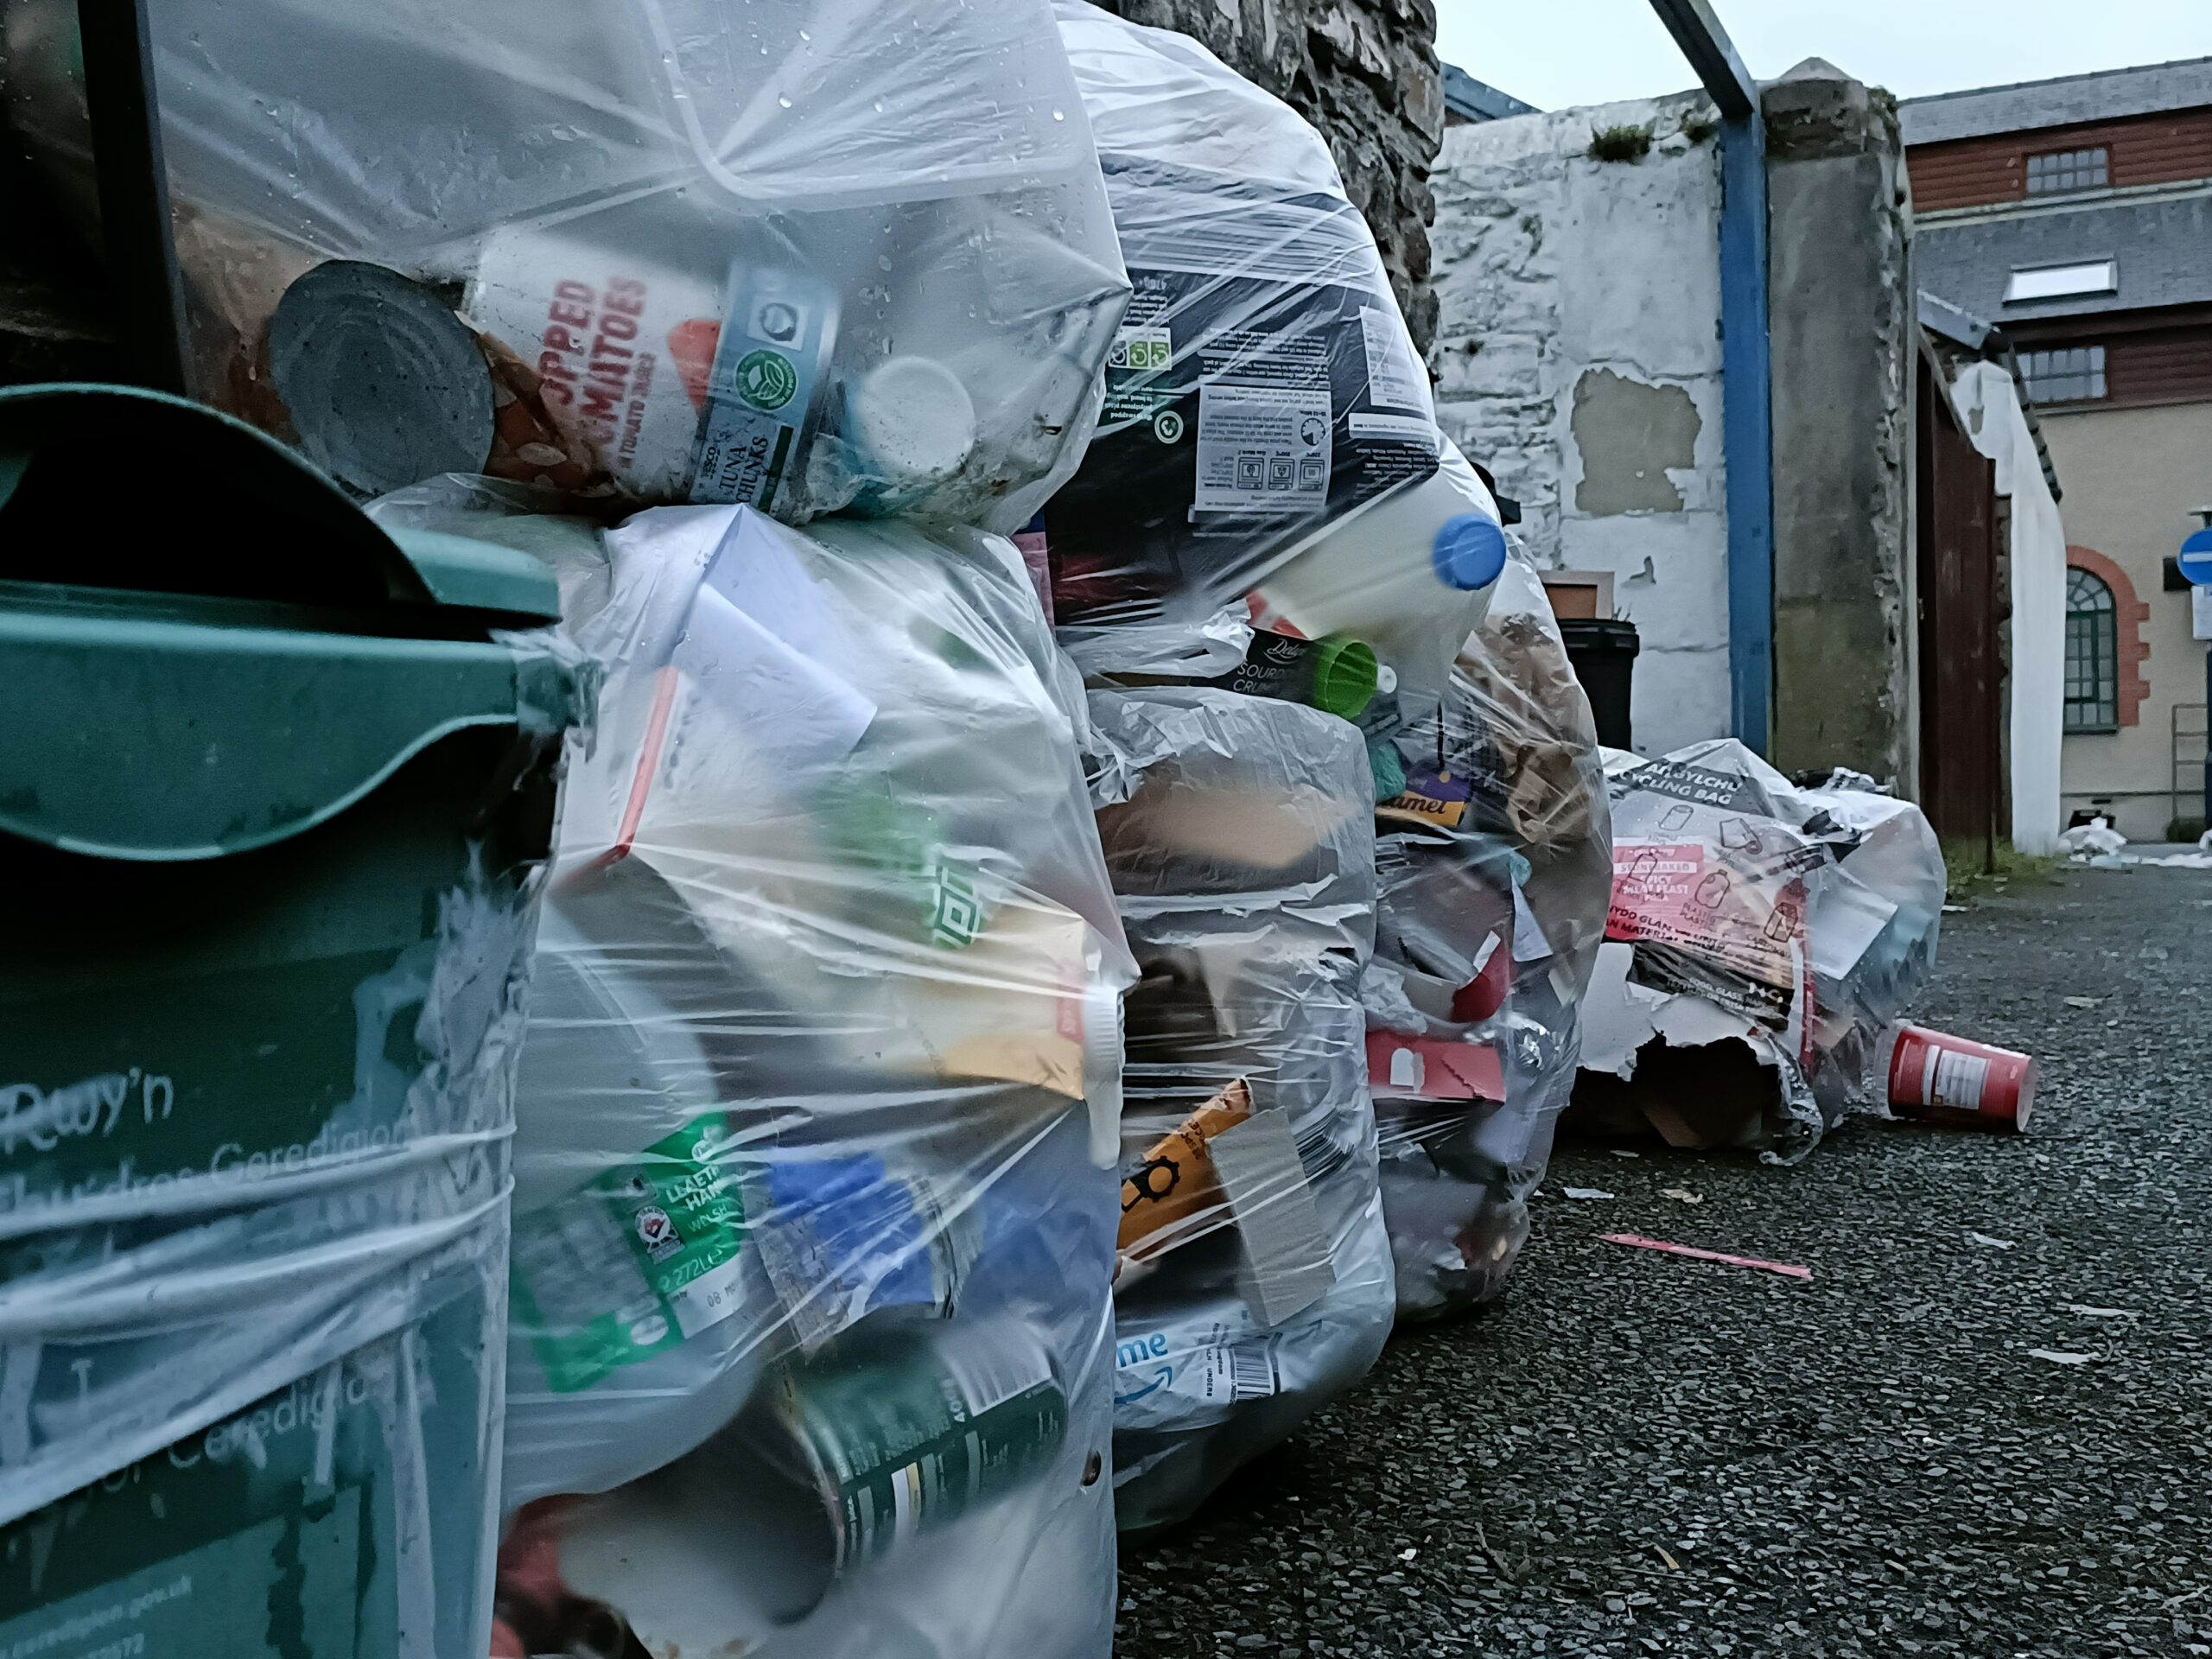 Household waste site in Ceredigion faces closure as part of cost-saving efforts by Council